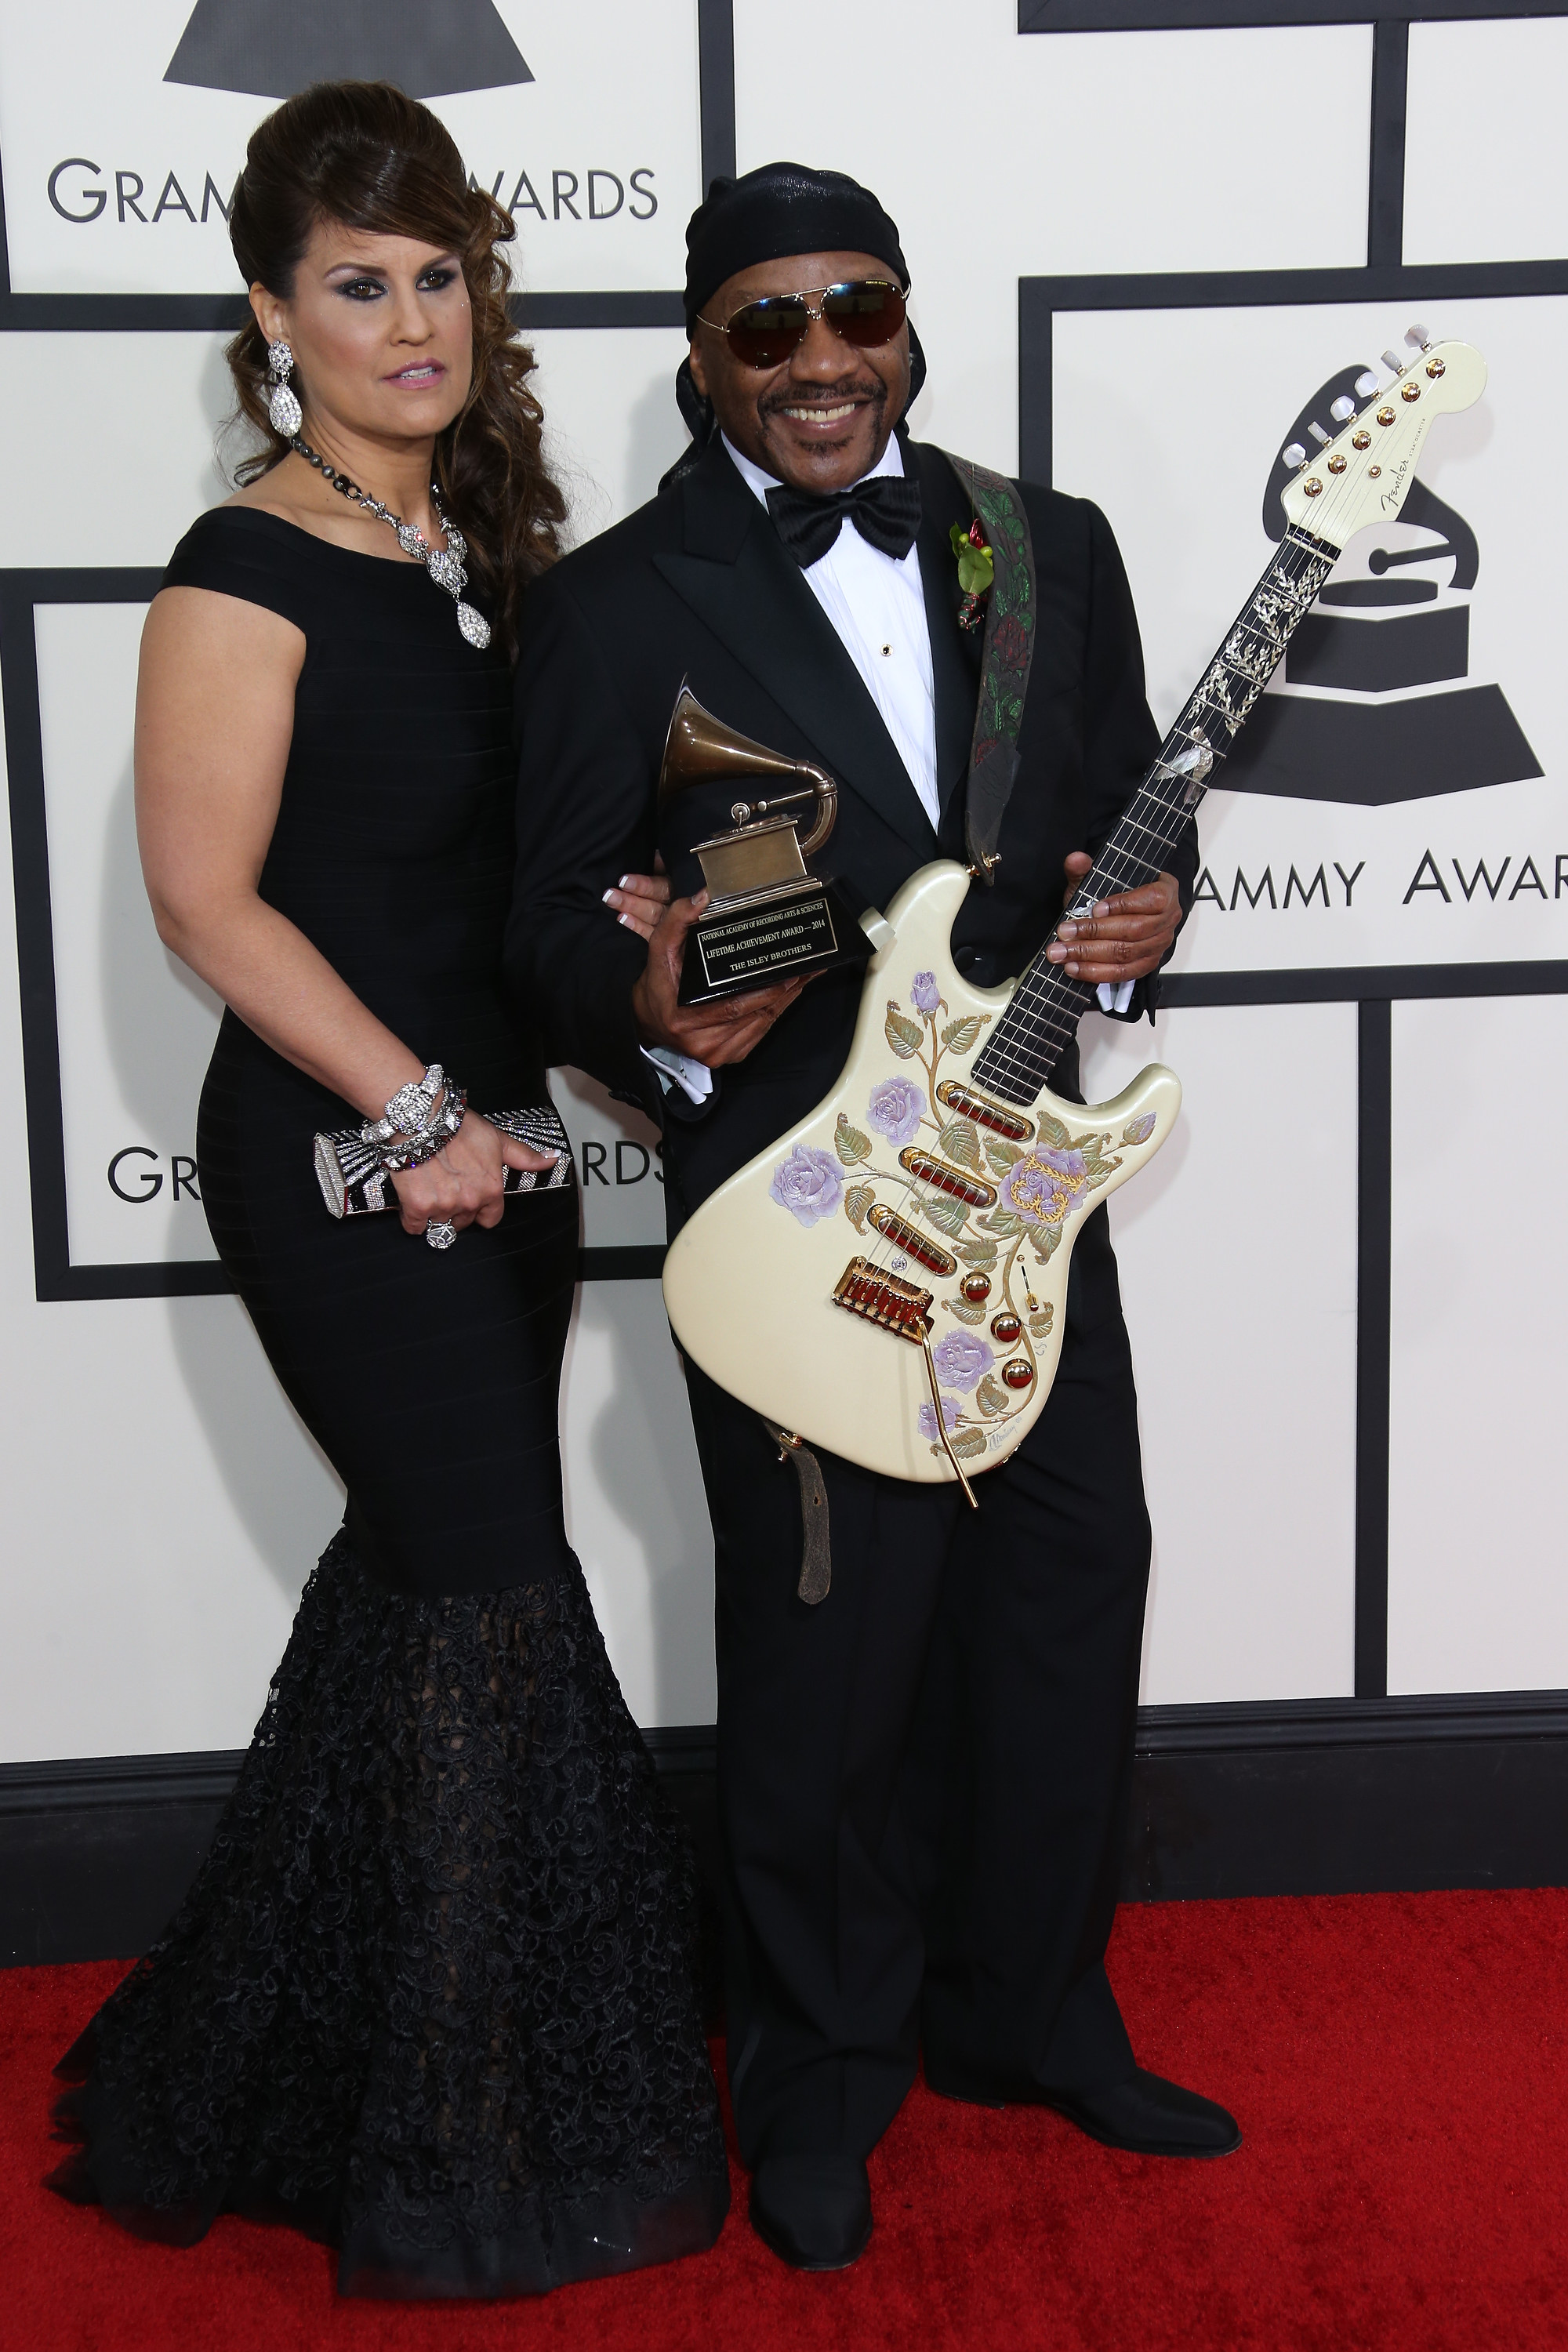 Tracy Isley and Ernie Isley arrive at the 56th Annual GRAMMY Awards at Staples Center on January 26, 2014, in Los Angeles, California. | Source: Getty Images